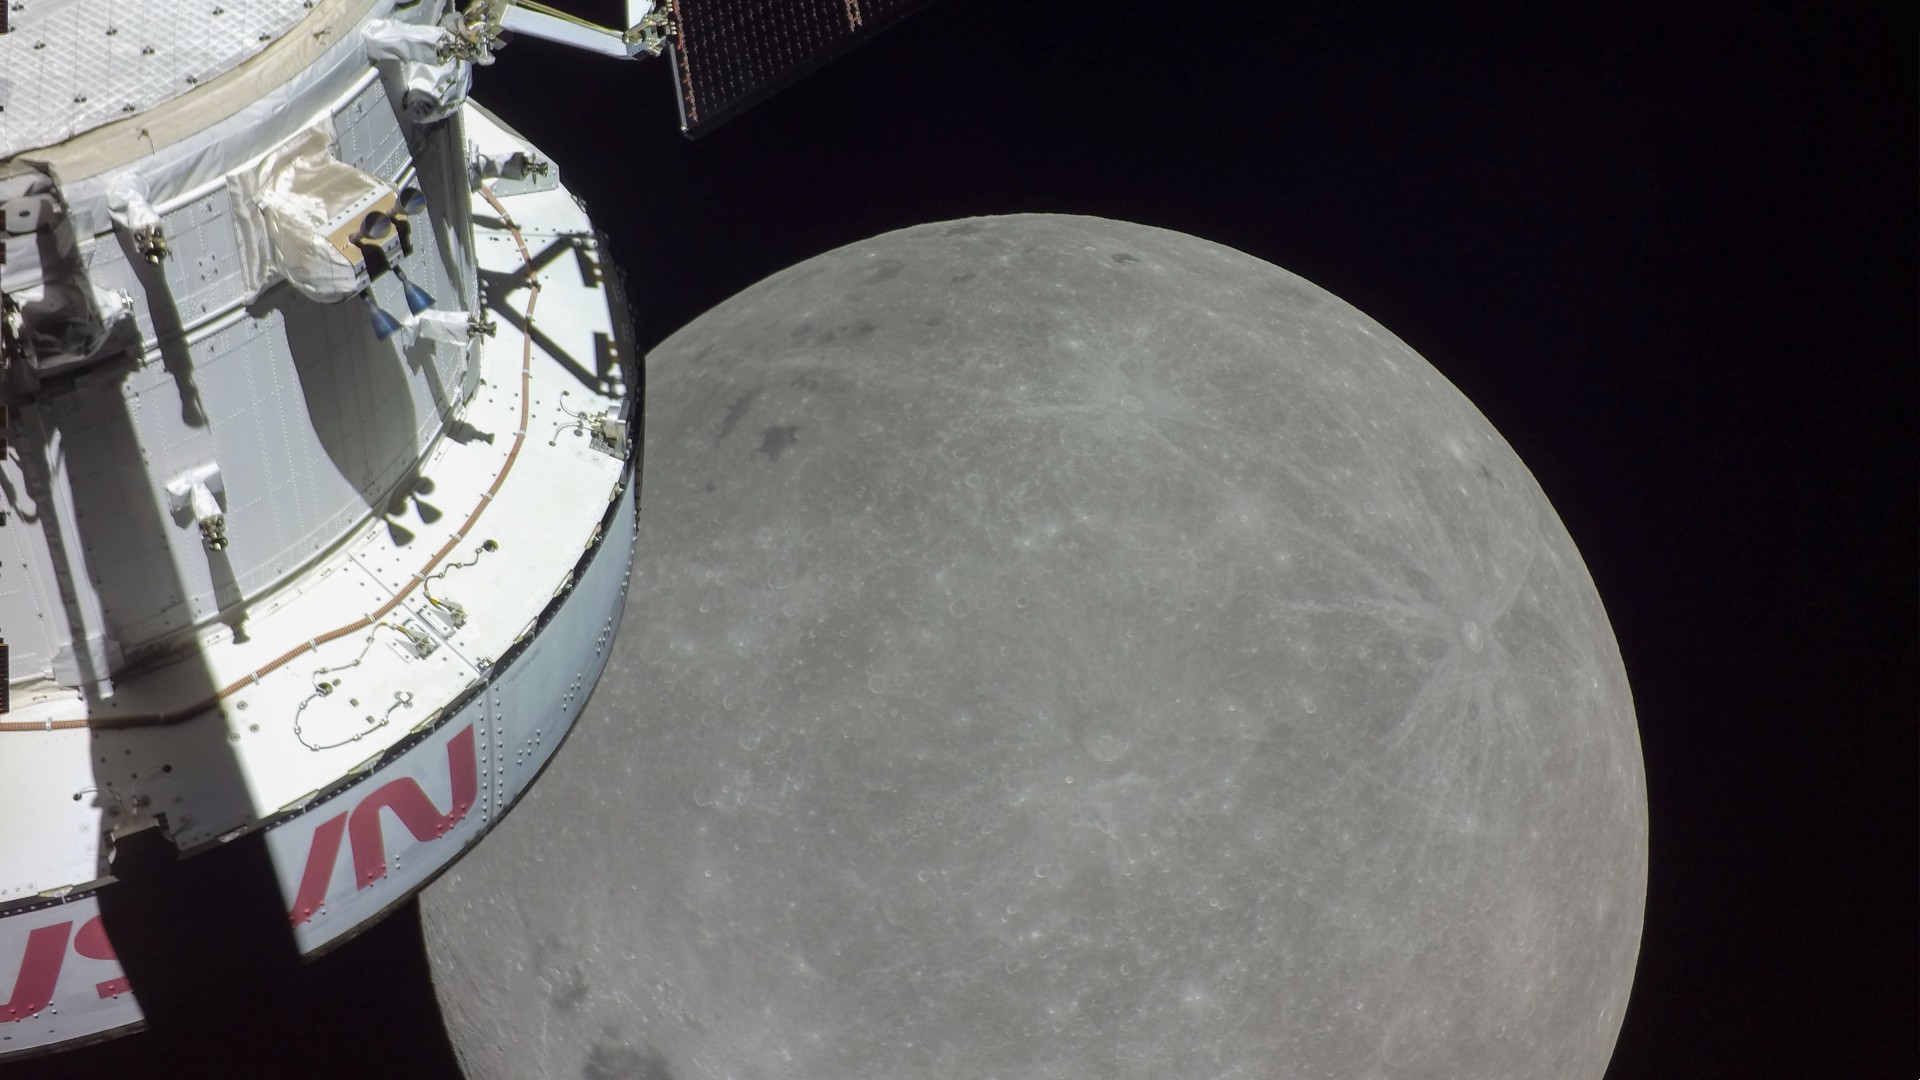 'We are ready:' New NASA documentary looks ahead to Artemis 2 moon mission (video)